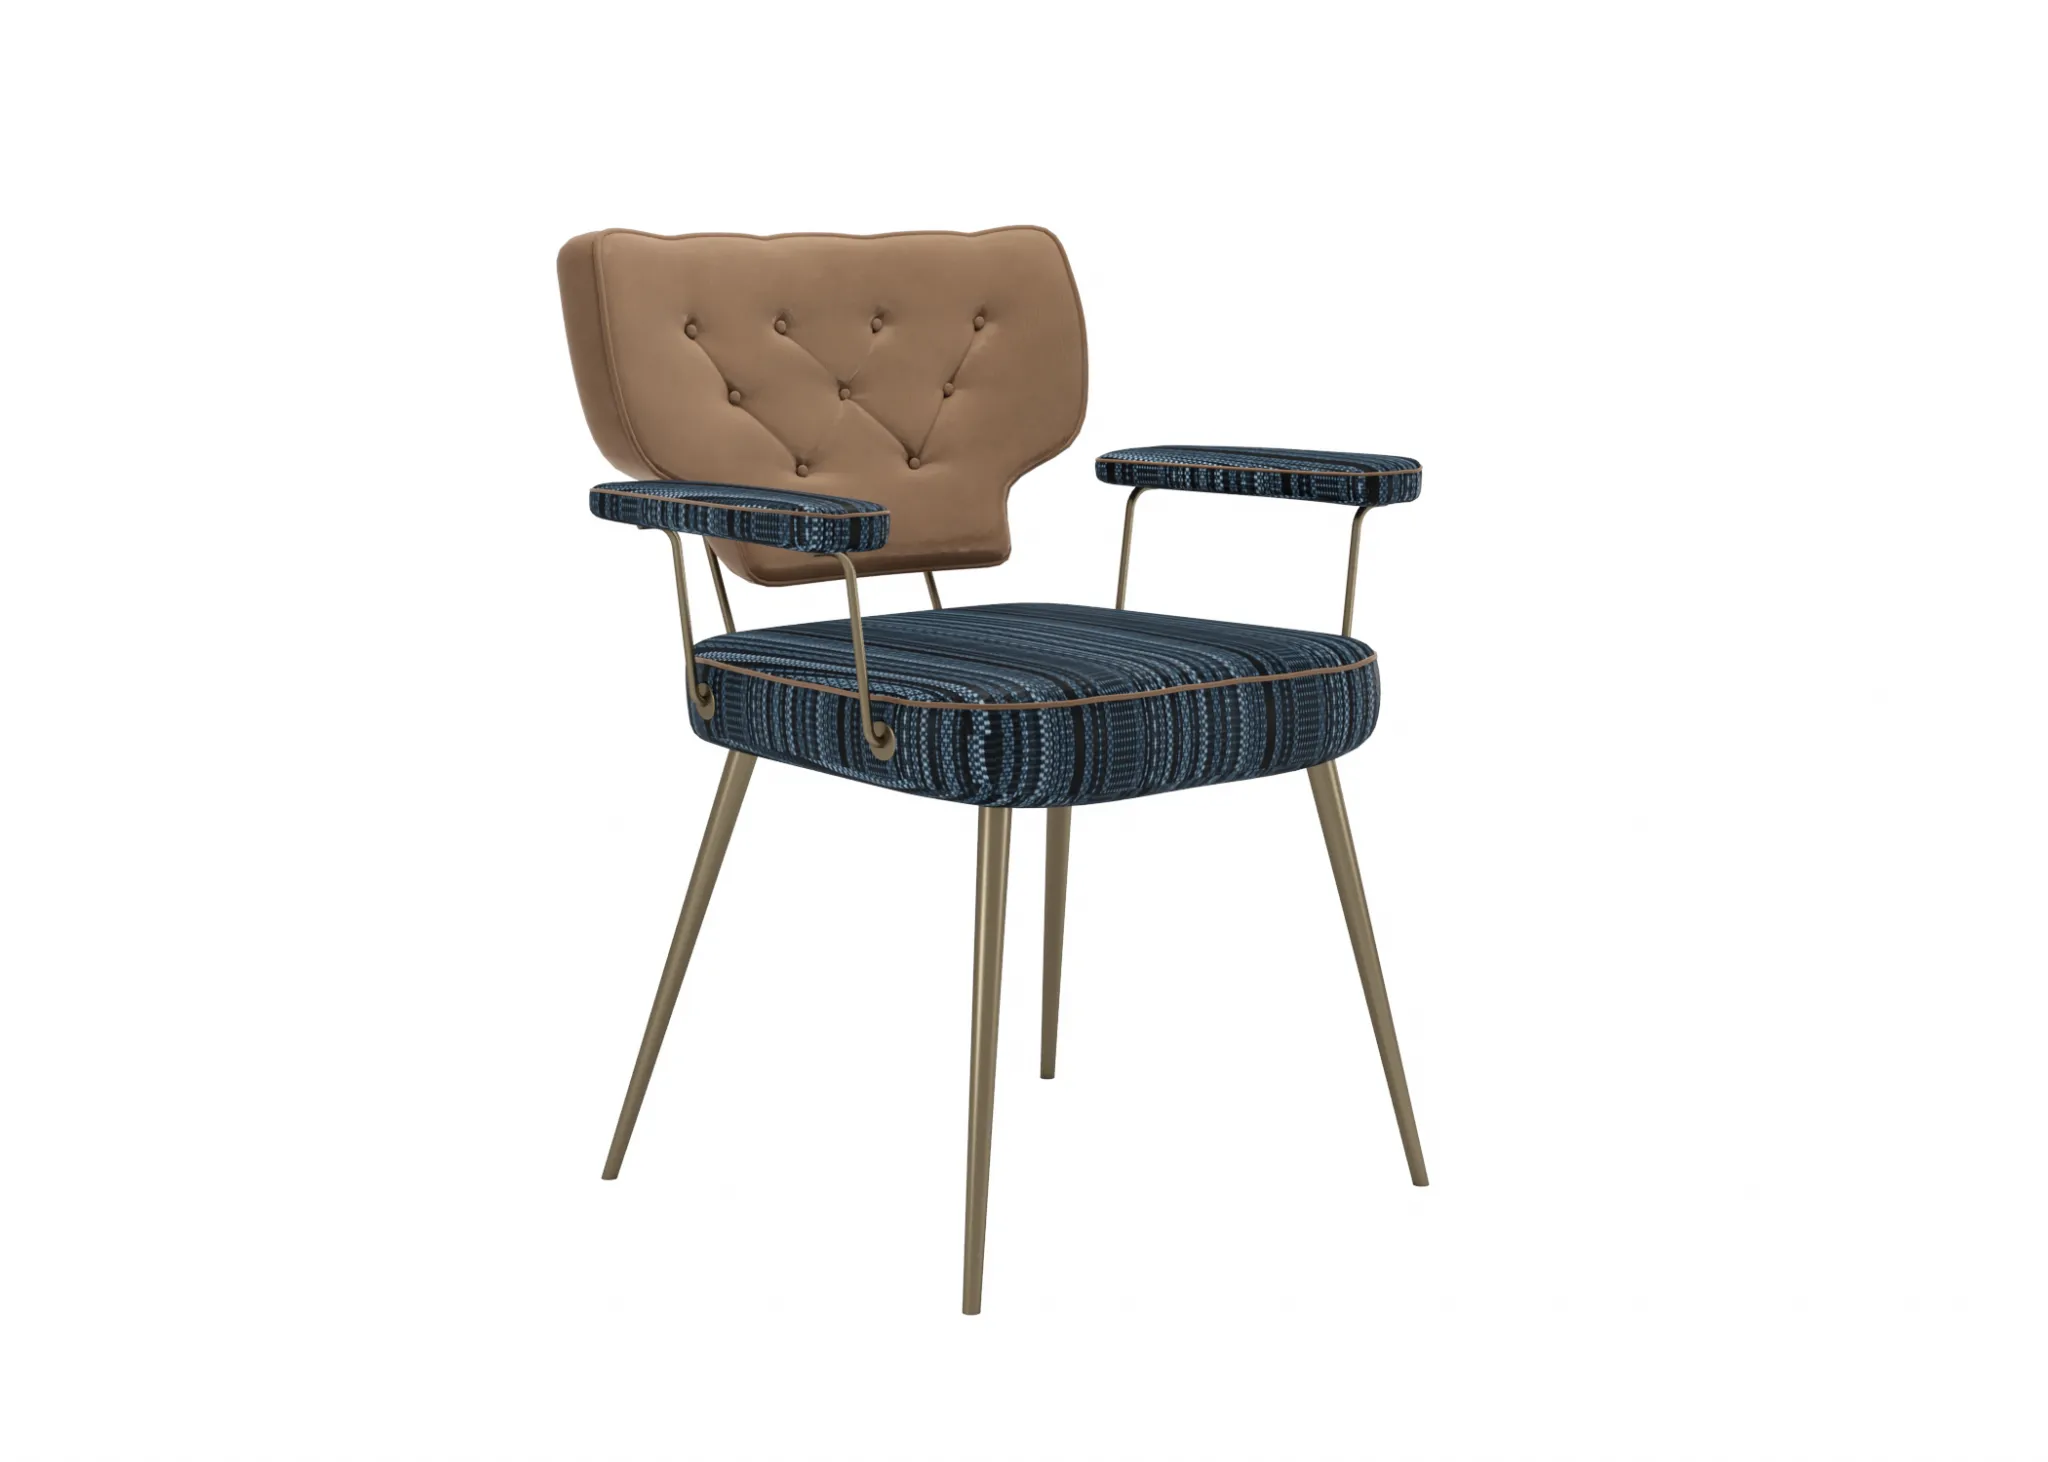 FURNITURE 3D MODELS – CHAIRS – 0424